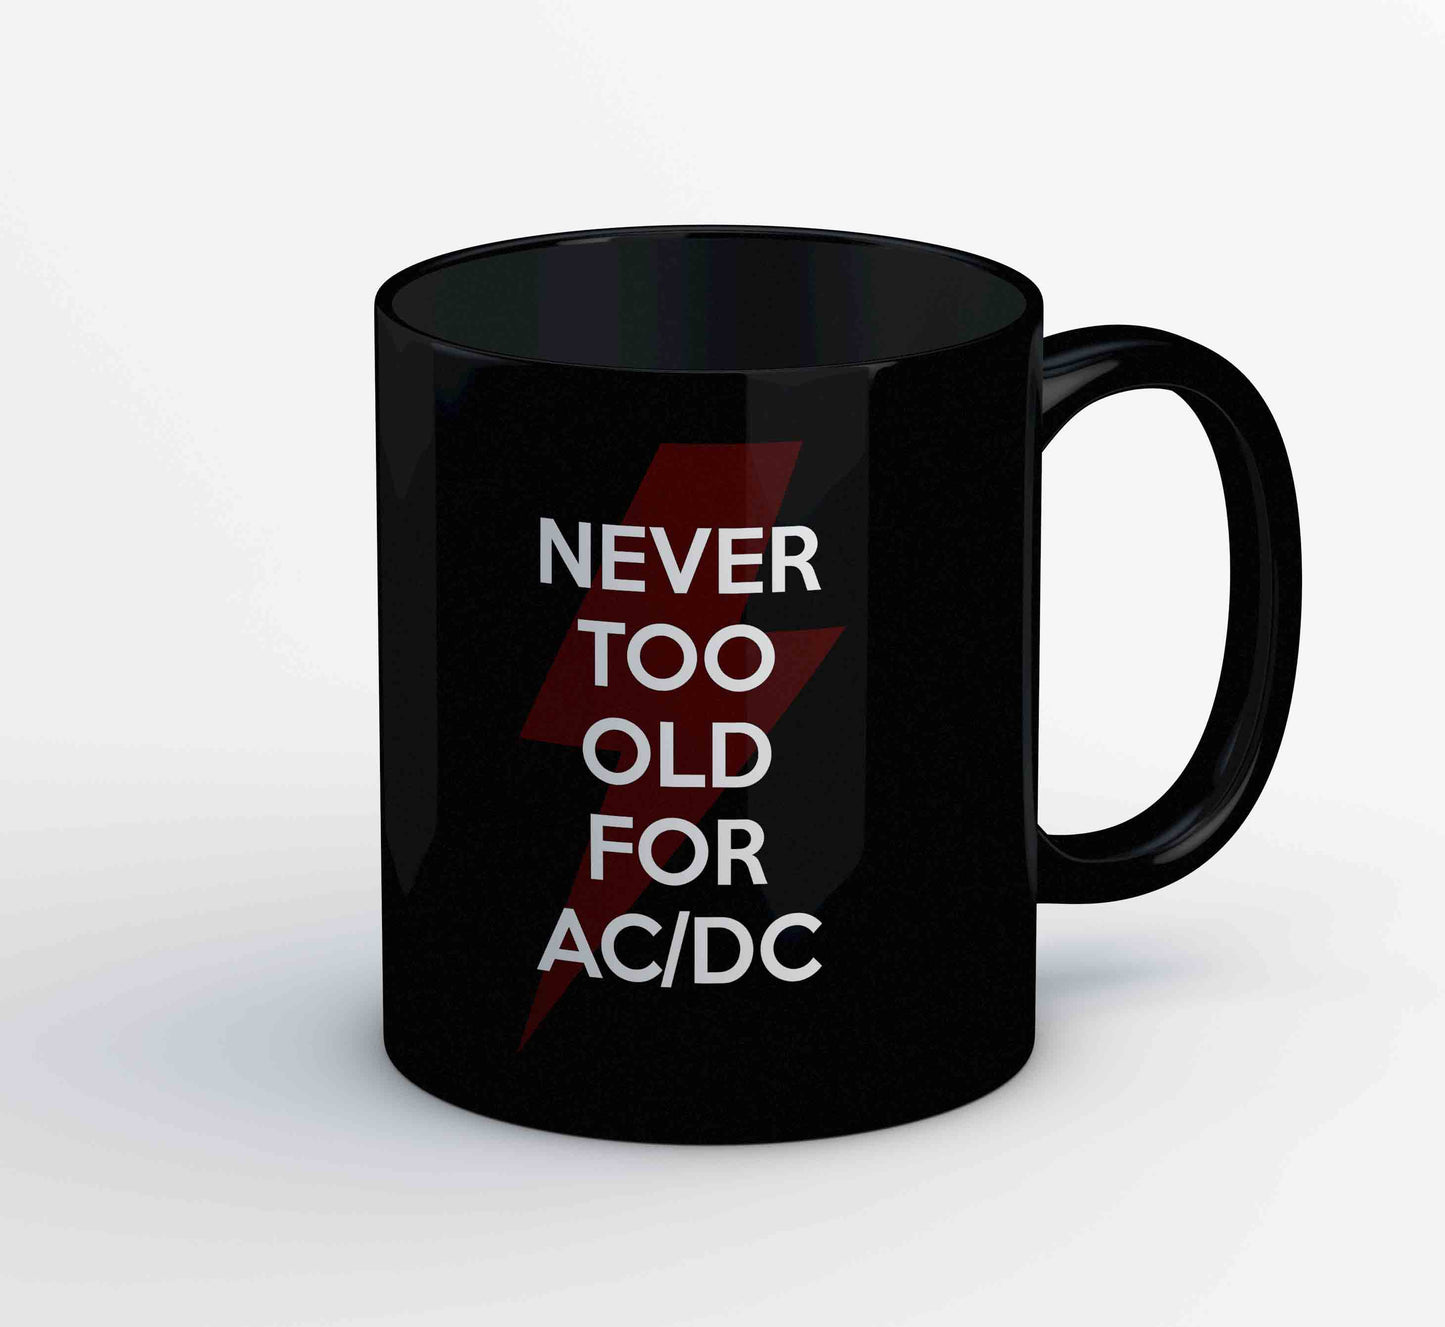 ac/dc never too old for ac/dc mug coffee ceramic music band buy online india the banyan tee tbt men women girls boys unisex